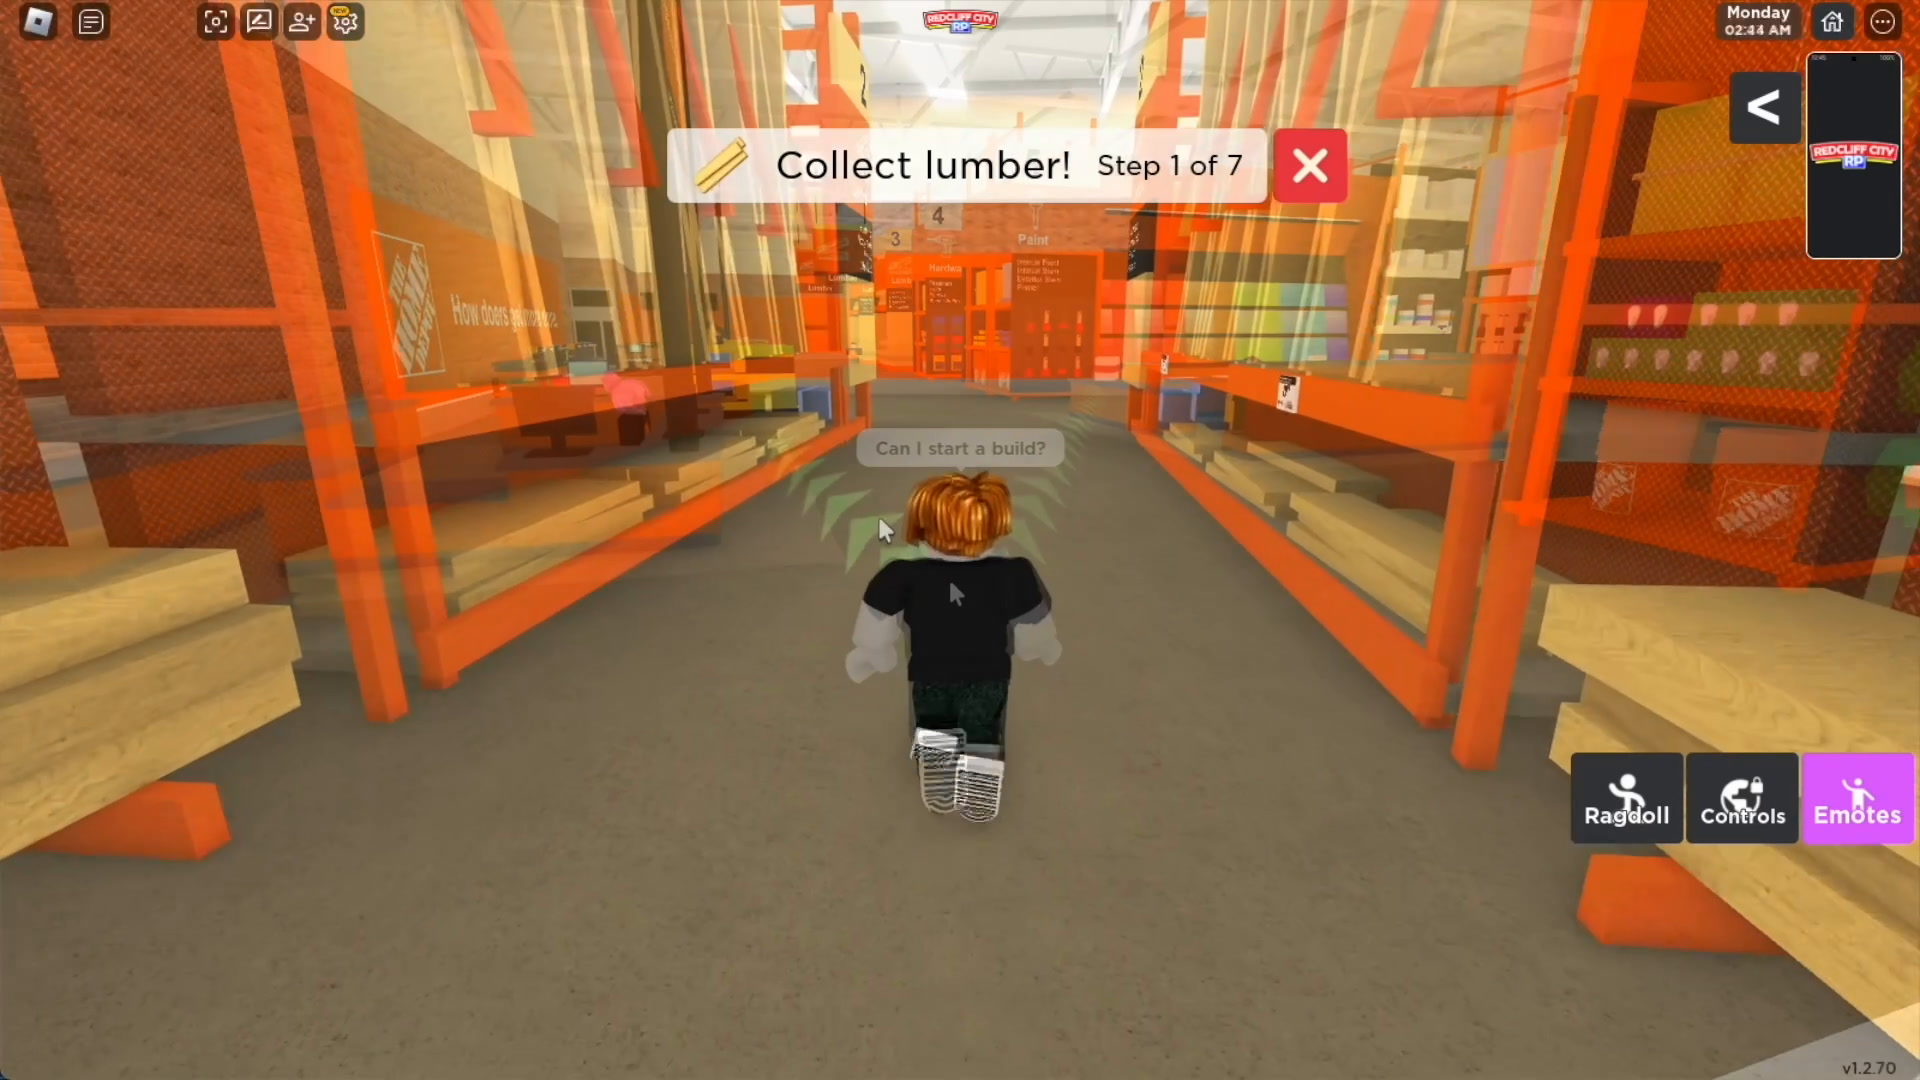 This Roblox game lets you visit virtual Home Depot